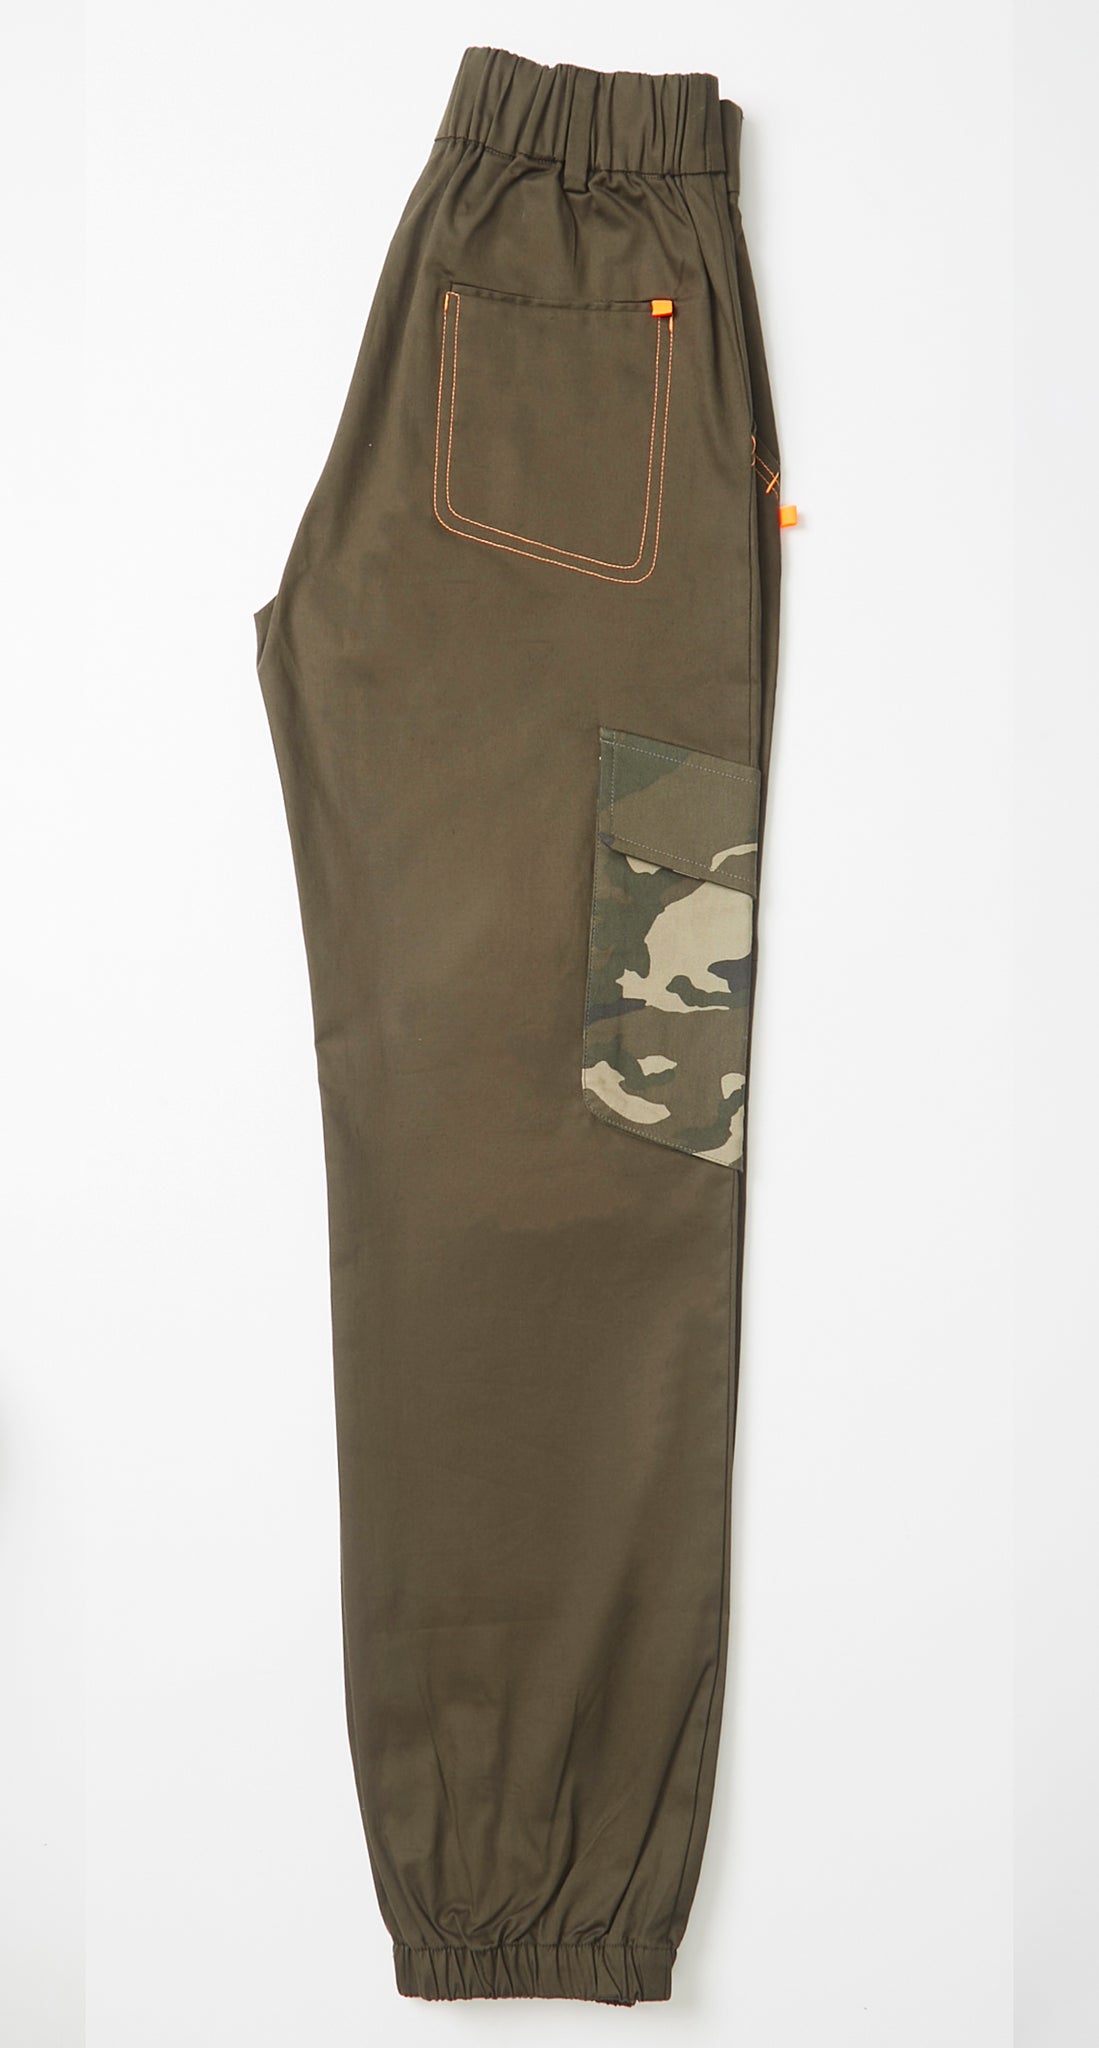 Military green cargo pants for women 